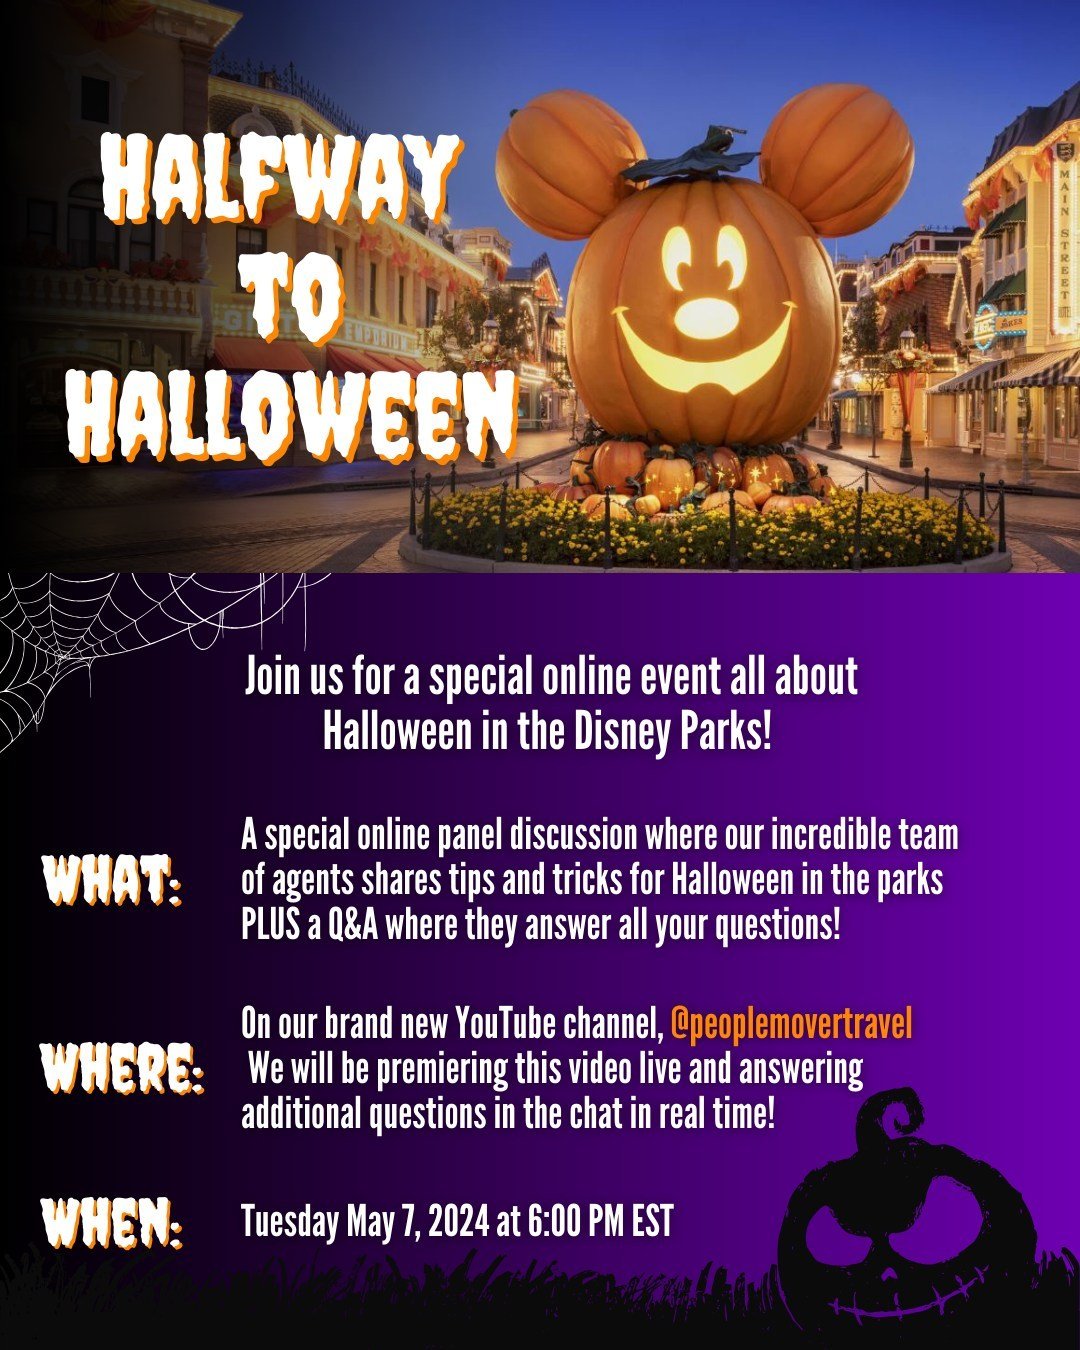 We are just one day away from this exciting event! ✨️ ⁠
⁠
AND Disney Parks just released some amazing details about their 2024 fall season so this is the perfect time to learn all about Halloween at Disney! 🎃 ⁠
⁠
Our agents are going to be discussin